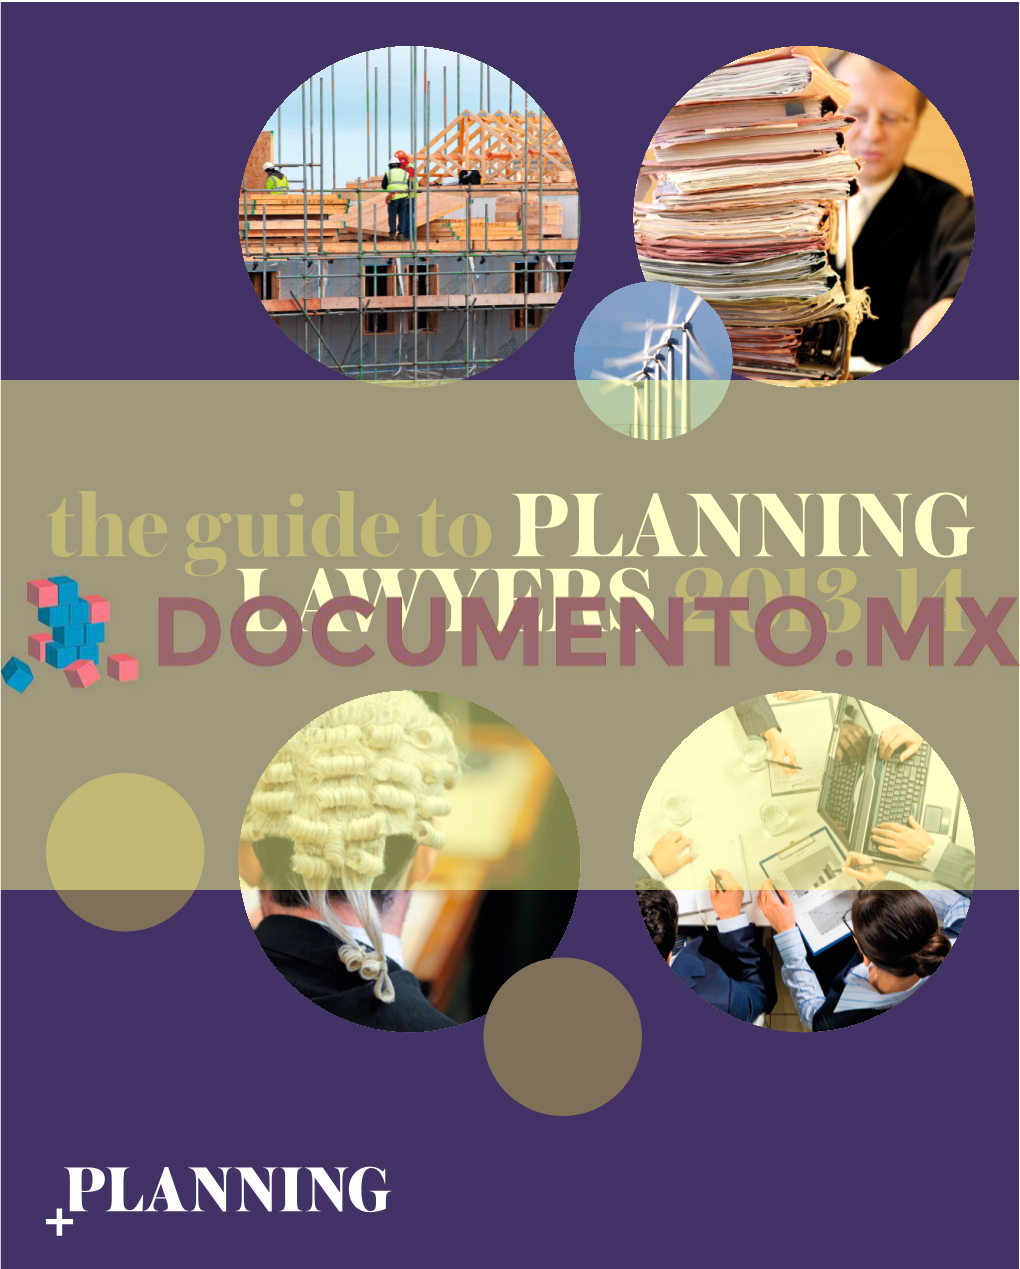 The Guide Toplanning LAWYERS2013